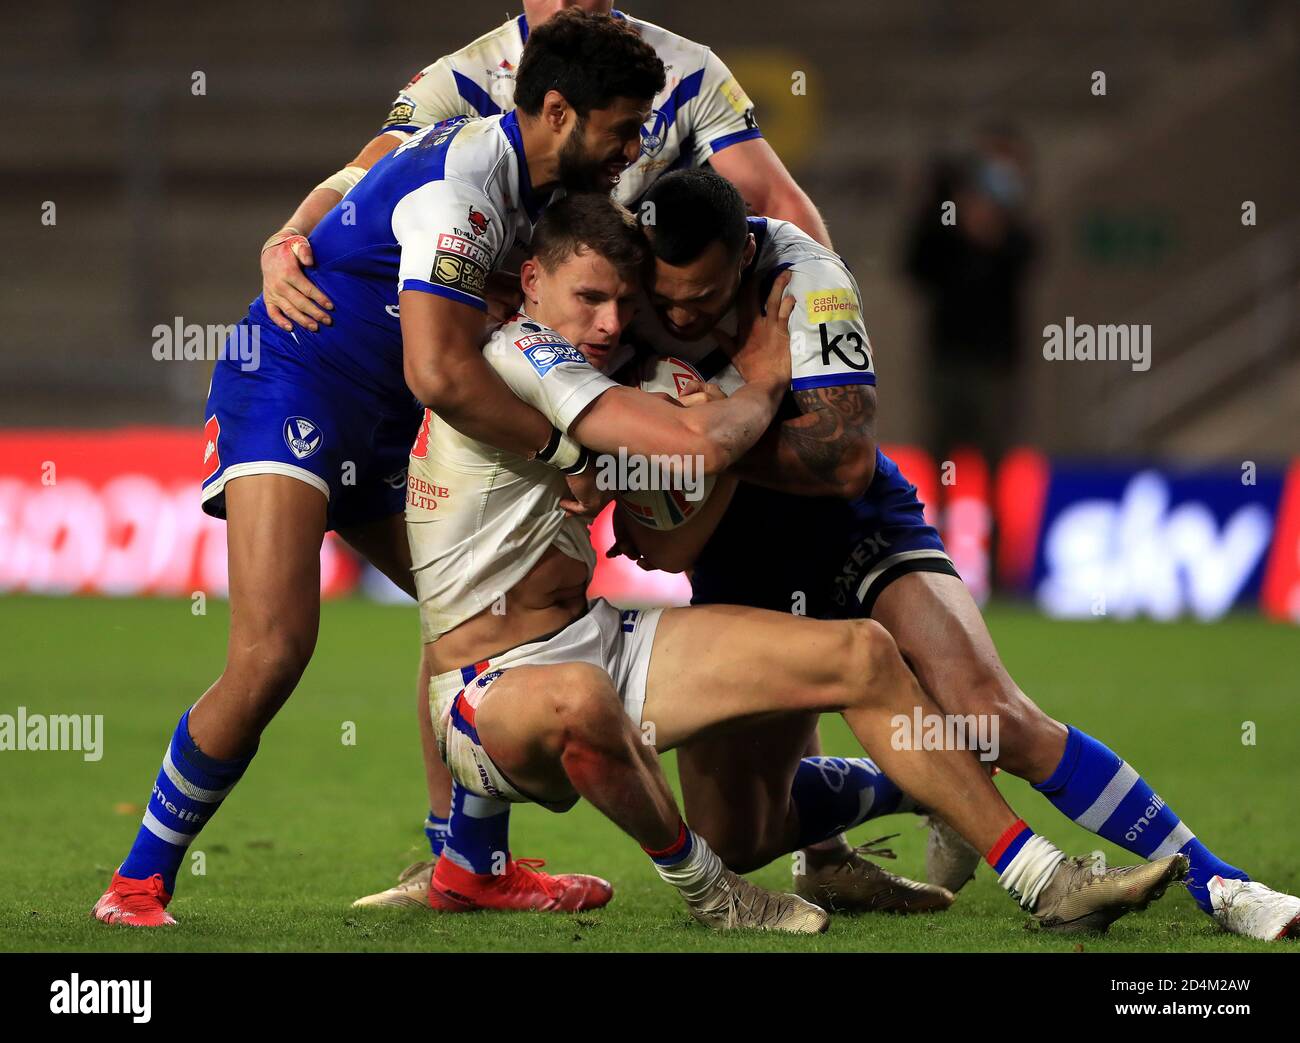 Wakefield Trinity's Alex Walker (centre) is tackled by St Helens' Dominique Peyroux (left) and Zeb Taia during the Betfred Super League match at Emerald Headingley Stadium, Leeds. Stock Photo